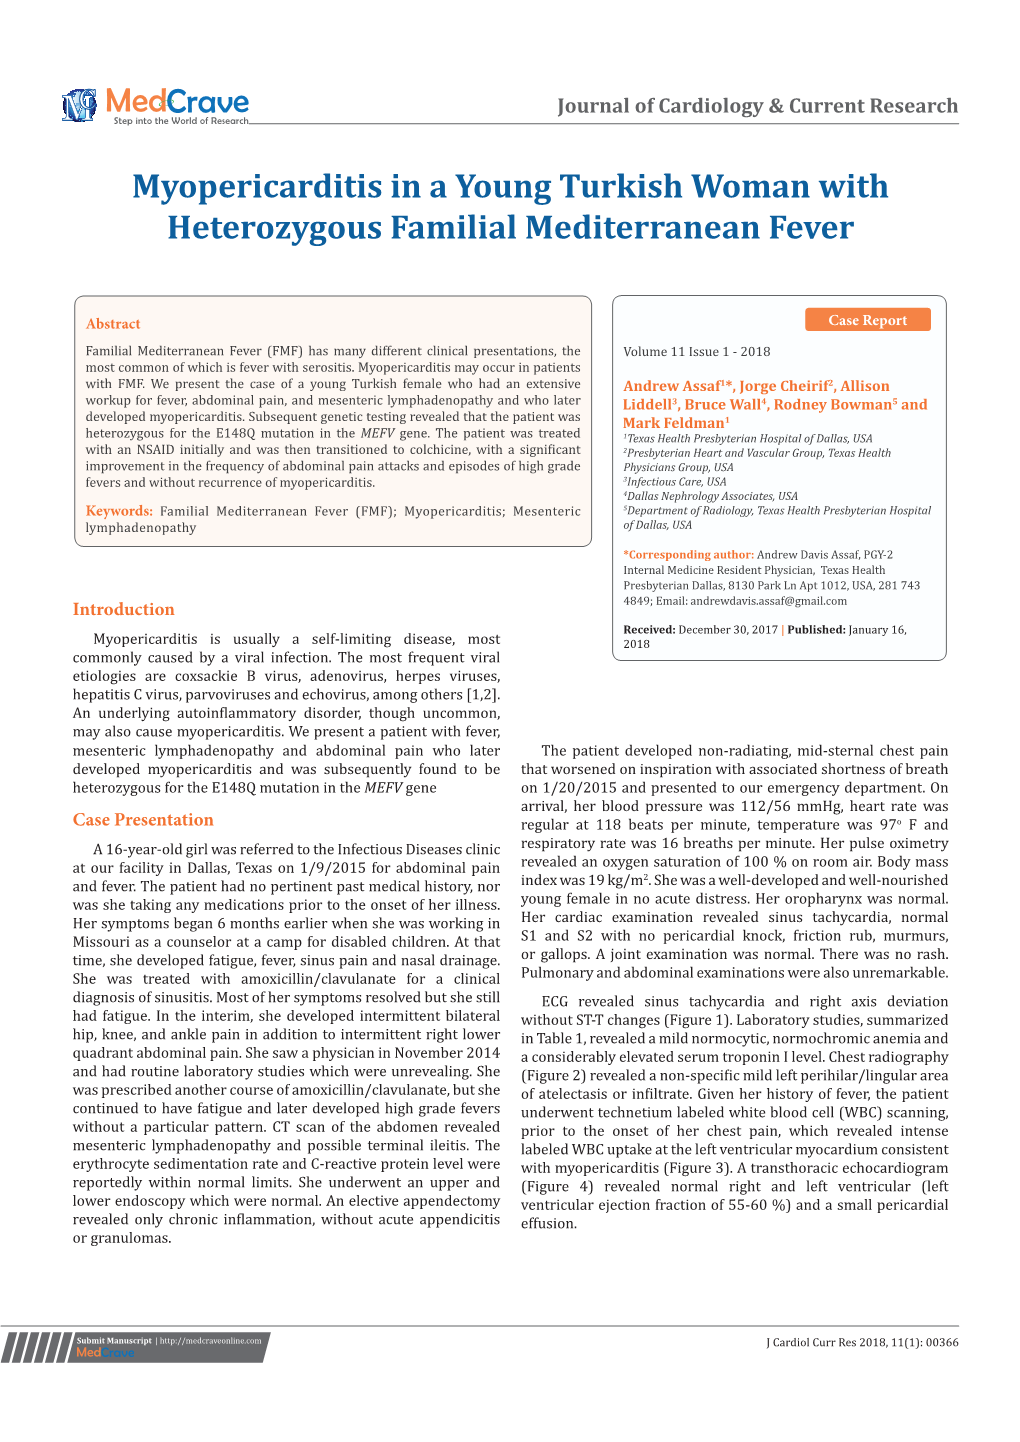 Myopericarditis in a Young Turkish Woman with Heterozygous Familial Mediterranean Fever